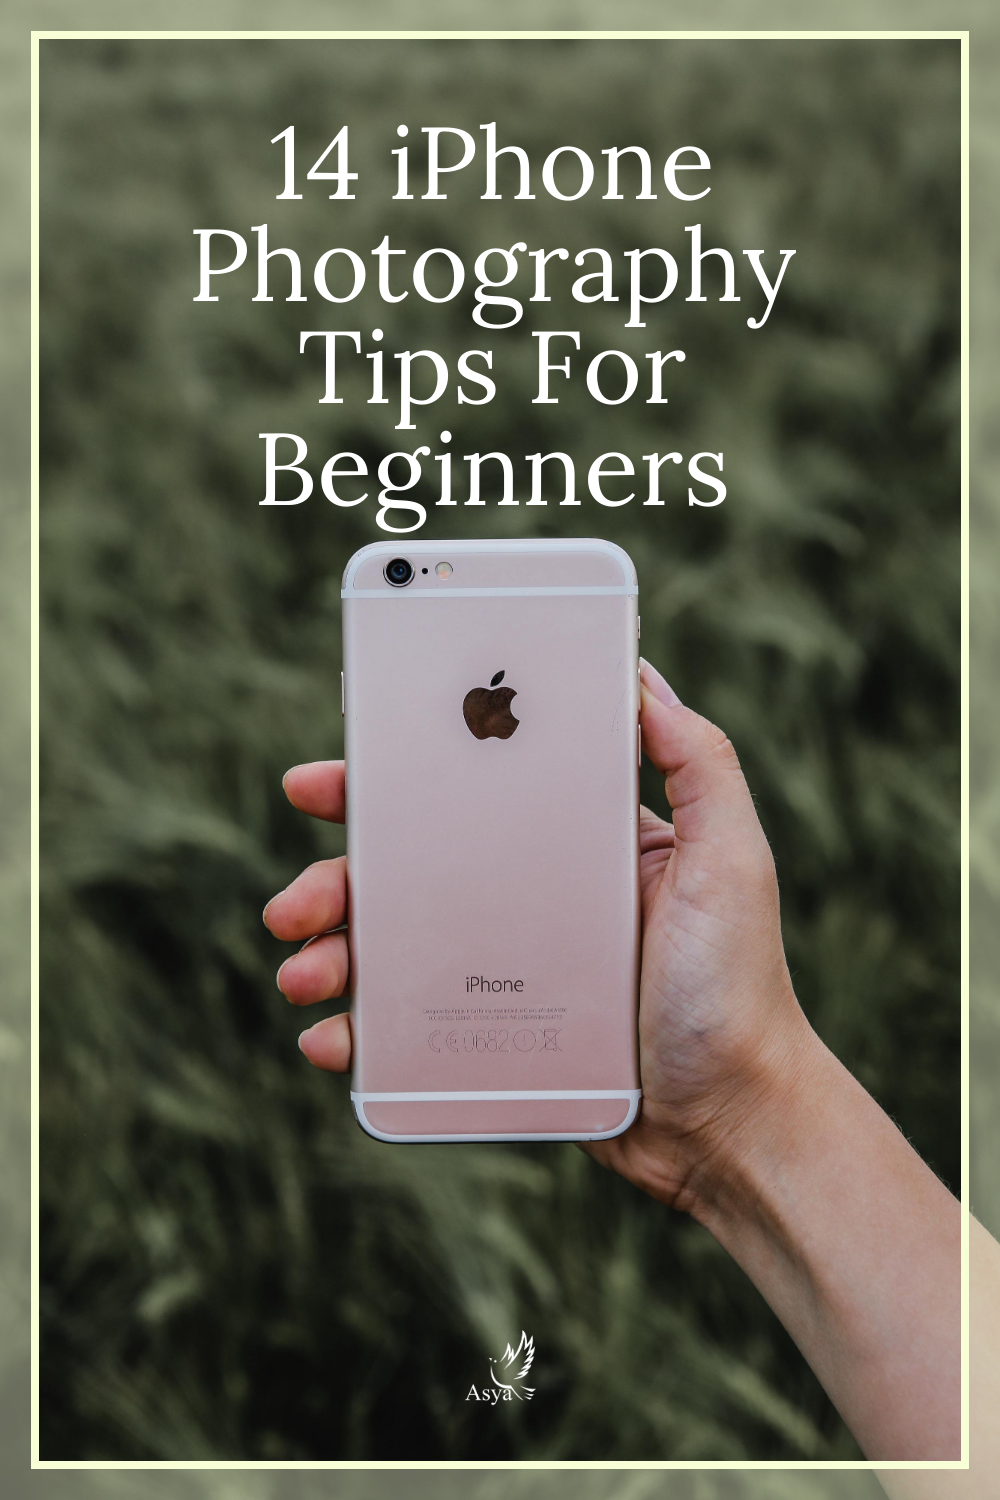 14 iPhone Photography Tips for Beginners by Asya.jpg